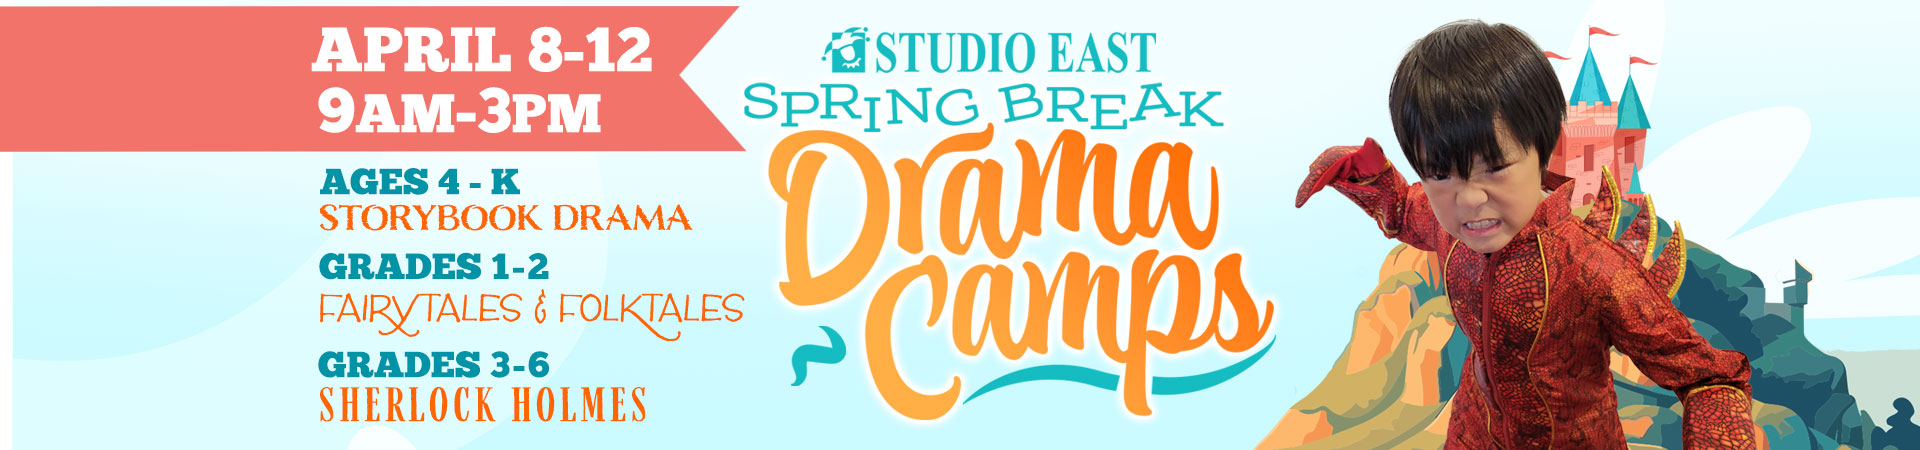 Spring Break Camps slider graphic shows an adorable boy dressed as a dragon